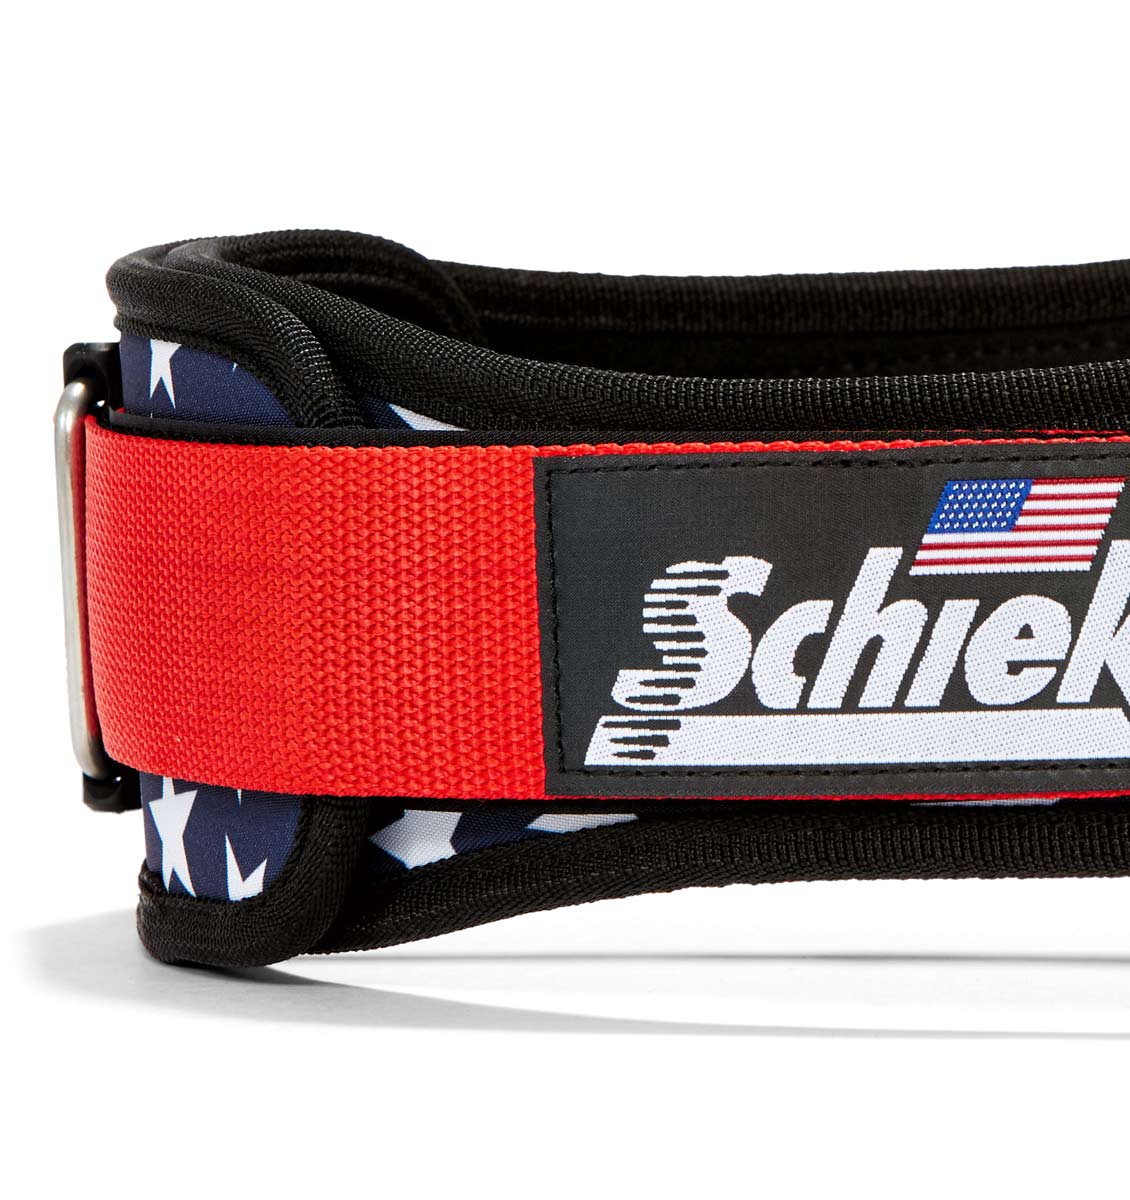 2004 Stars n Stripes Schiek Contour Weight Lifting Belt Stars and Stripes Side Close Up